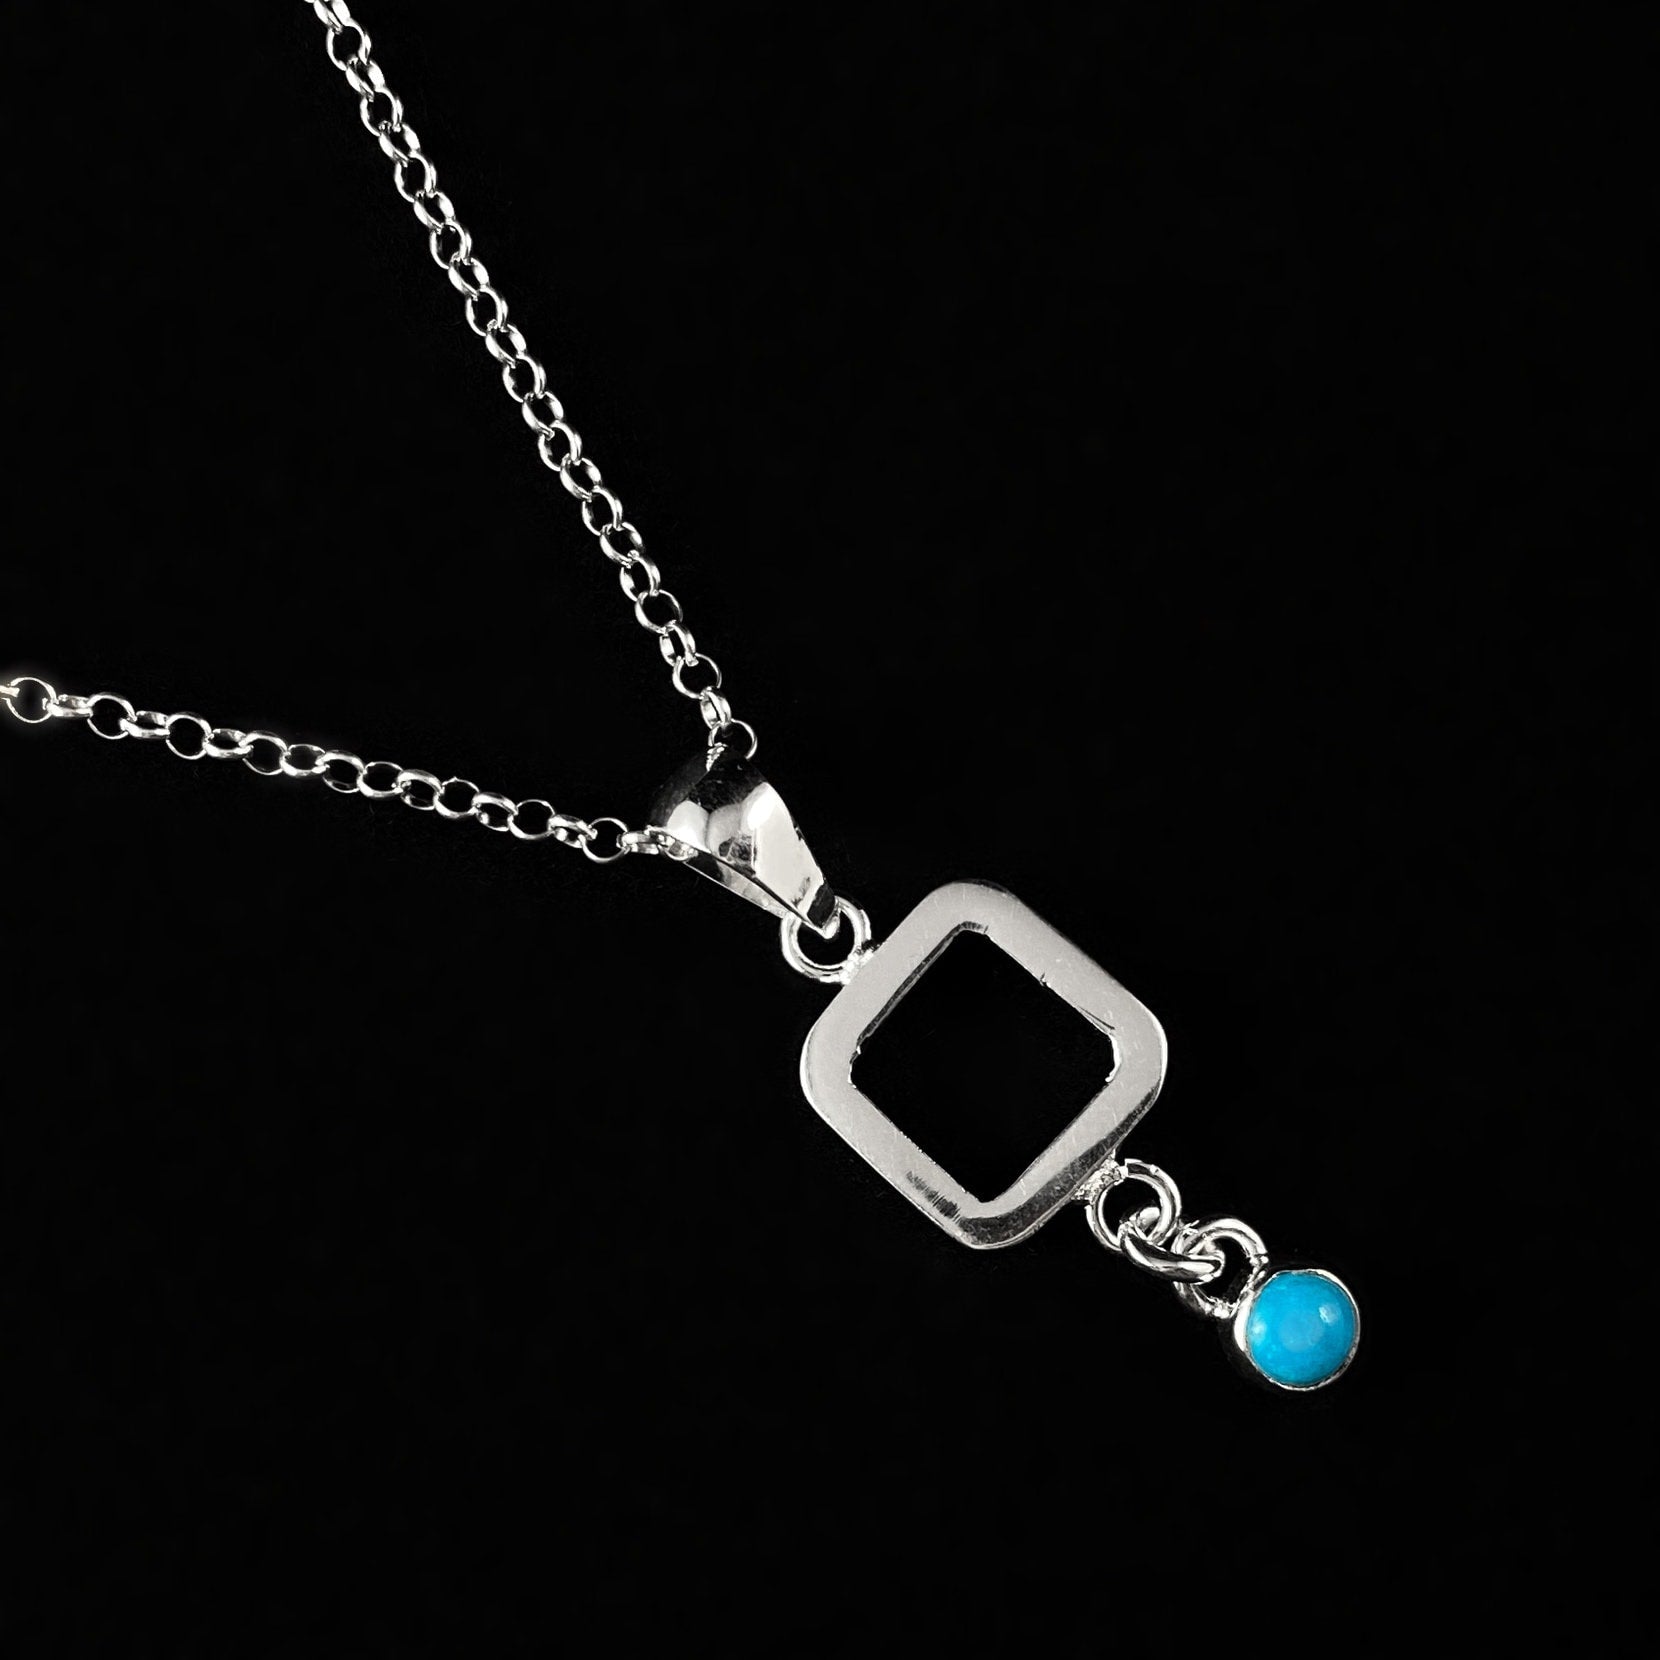 Handmade Sterling Silver Pendant Necklace with Turquoise Accent -Designs by Monica